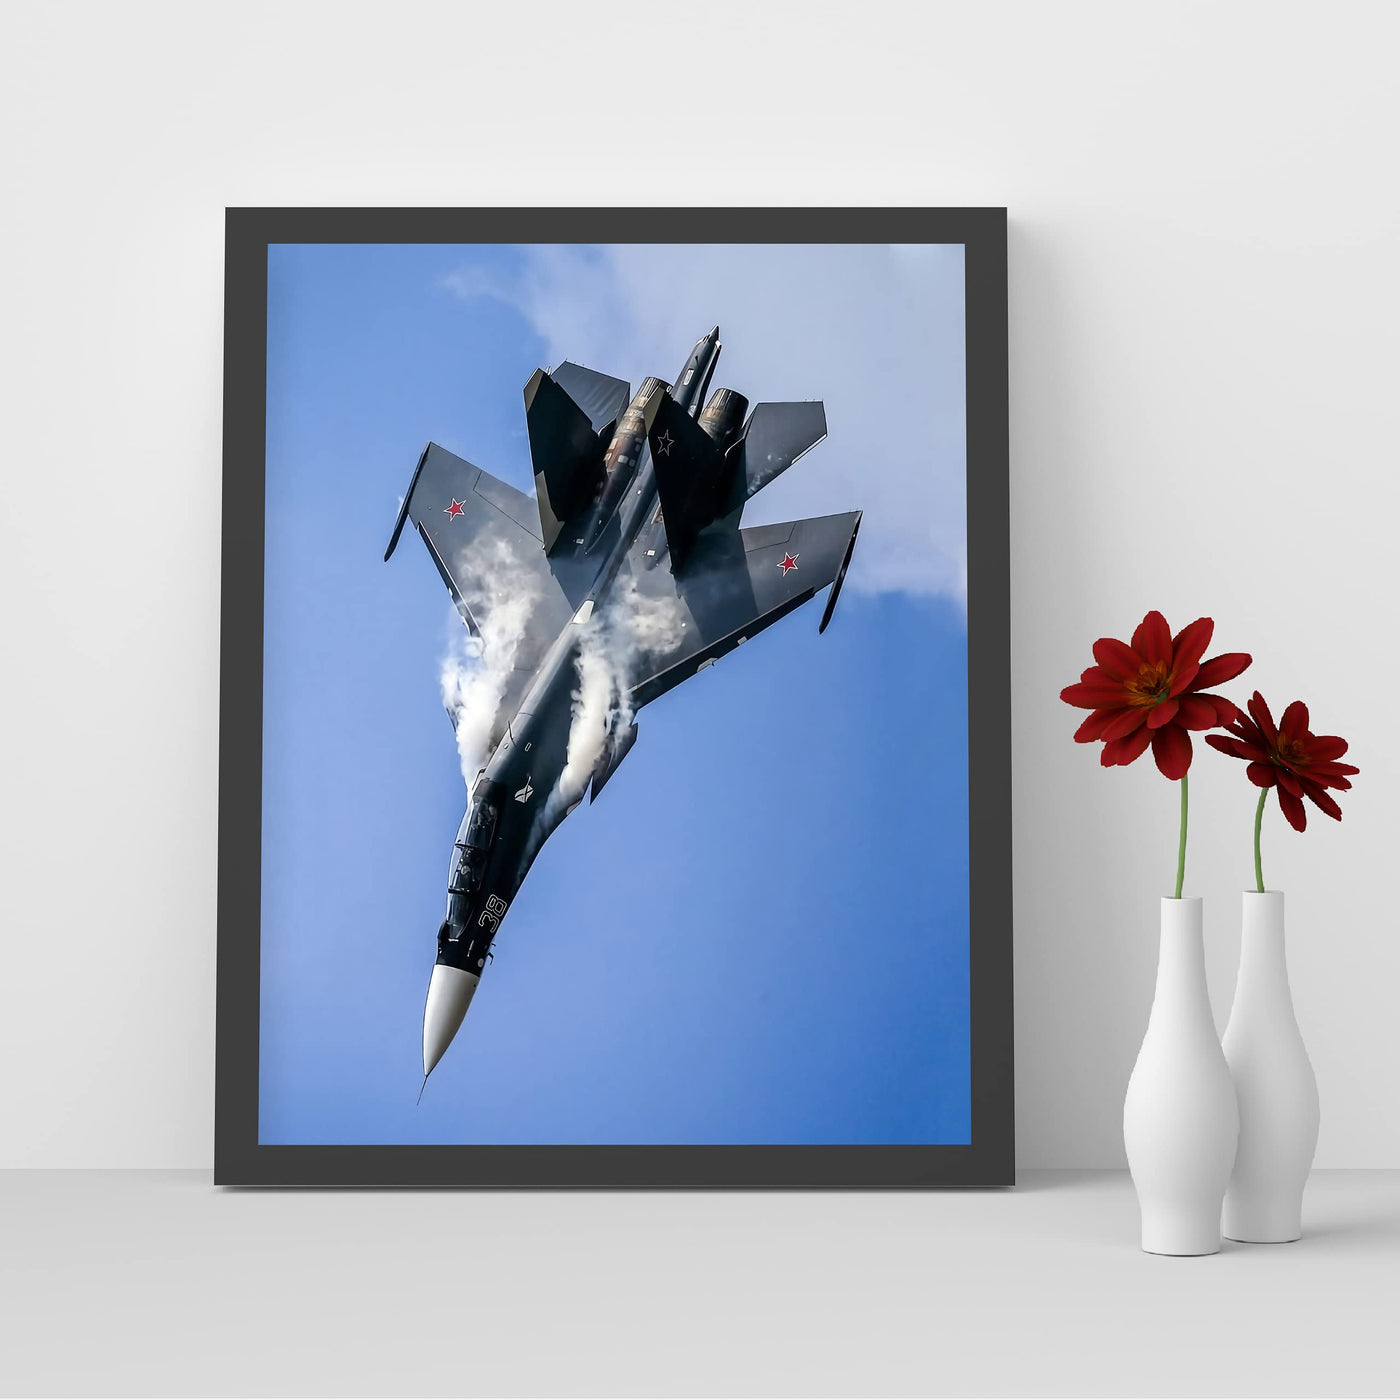 US Air Force Fighter Jet -8x10" American Military Aircraft Wall Print-Ready to Frame. Home-Office-School Decor. Perfect Sign for Game Room-Garage-Cave! Great Gift for Active Duty Military & Veterans!